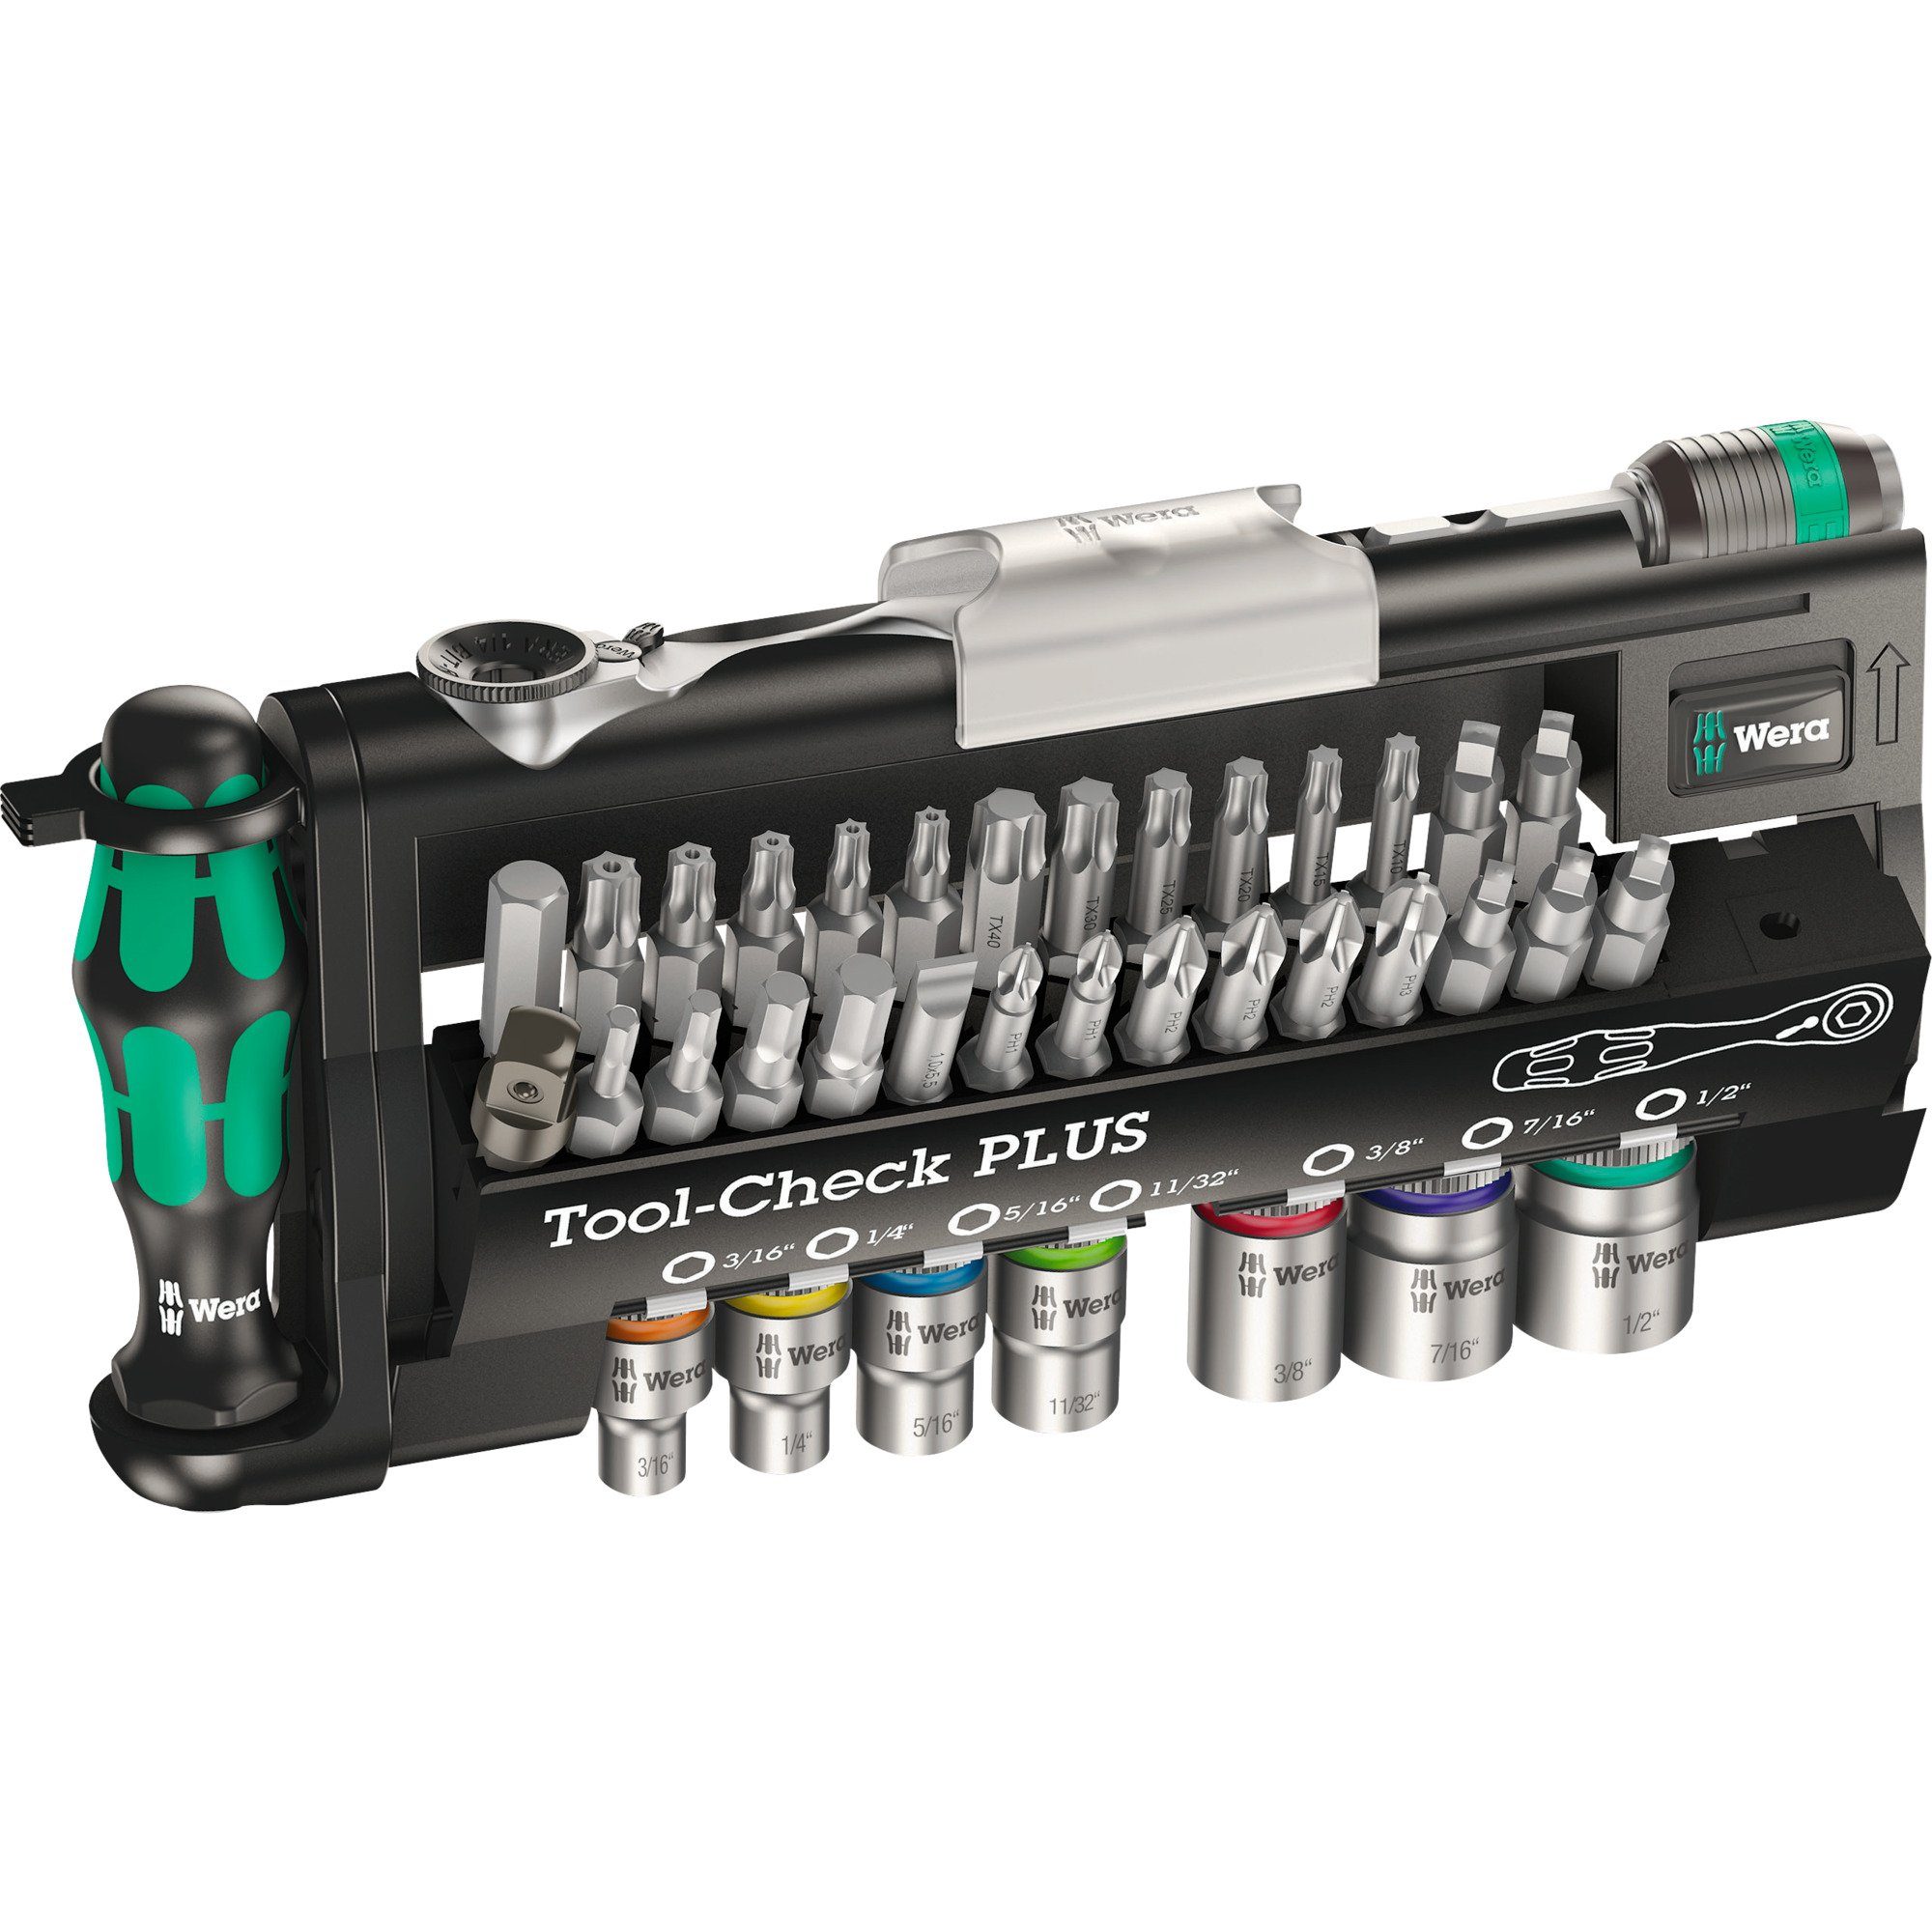 Wera Ratsche Tool-Check PLUS Imperial, 39-teilig